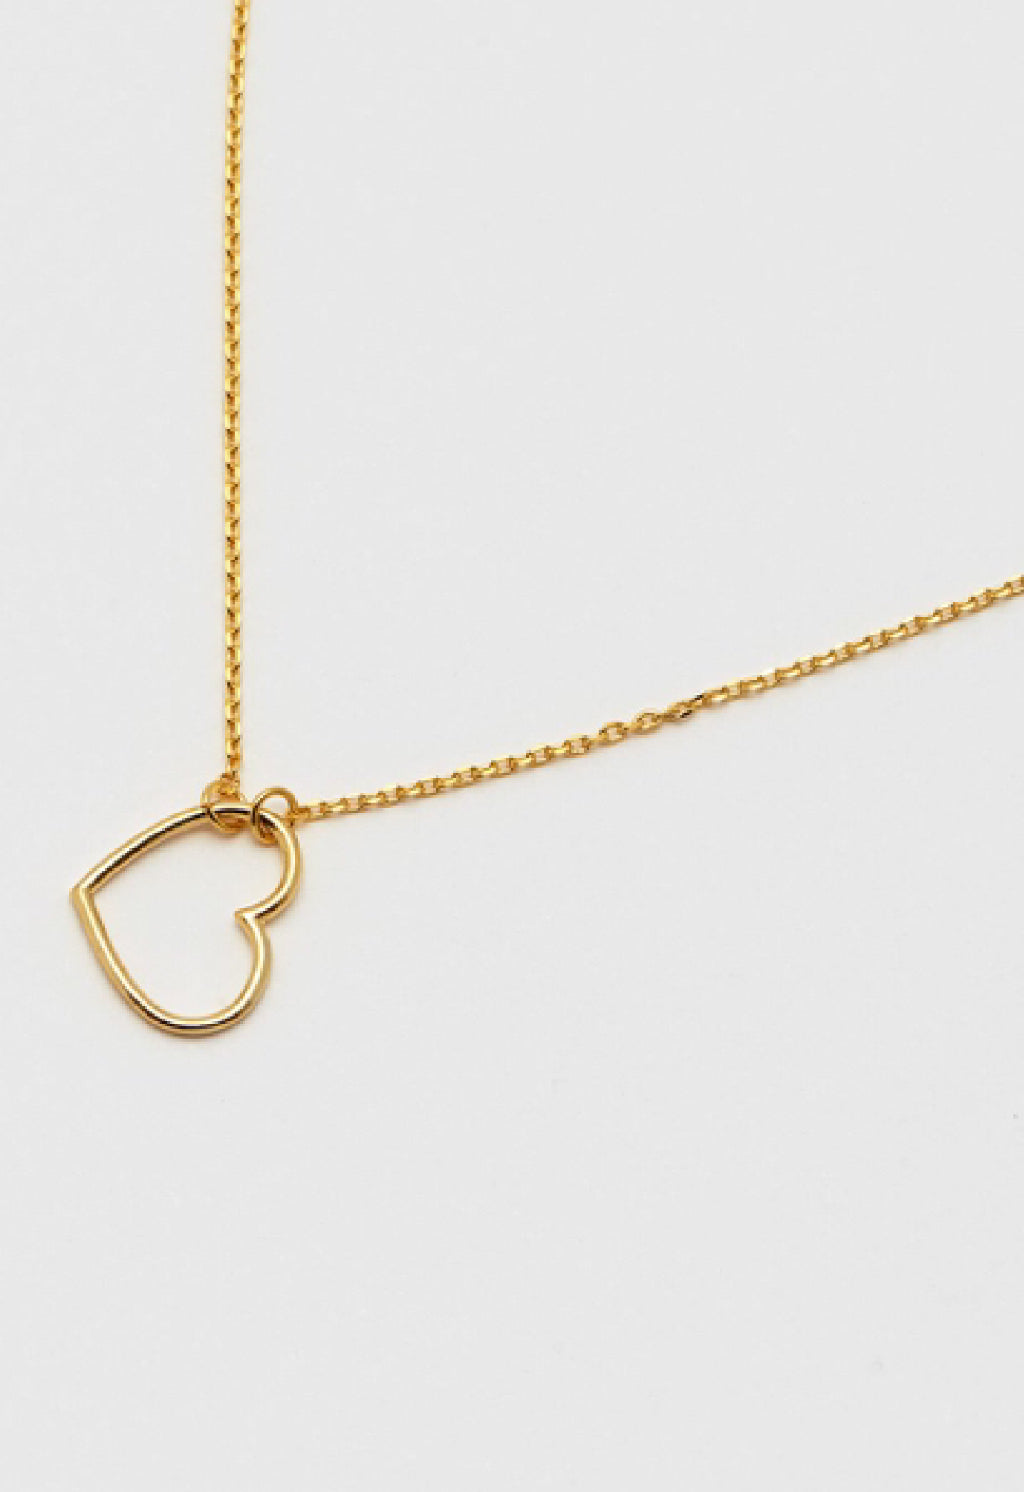 Open Heart Necklace - Gold Plated